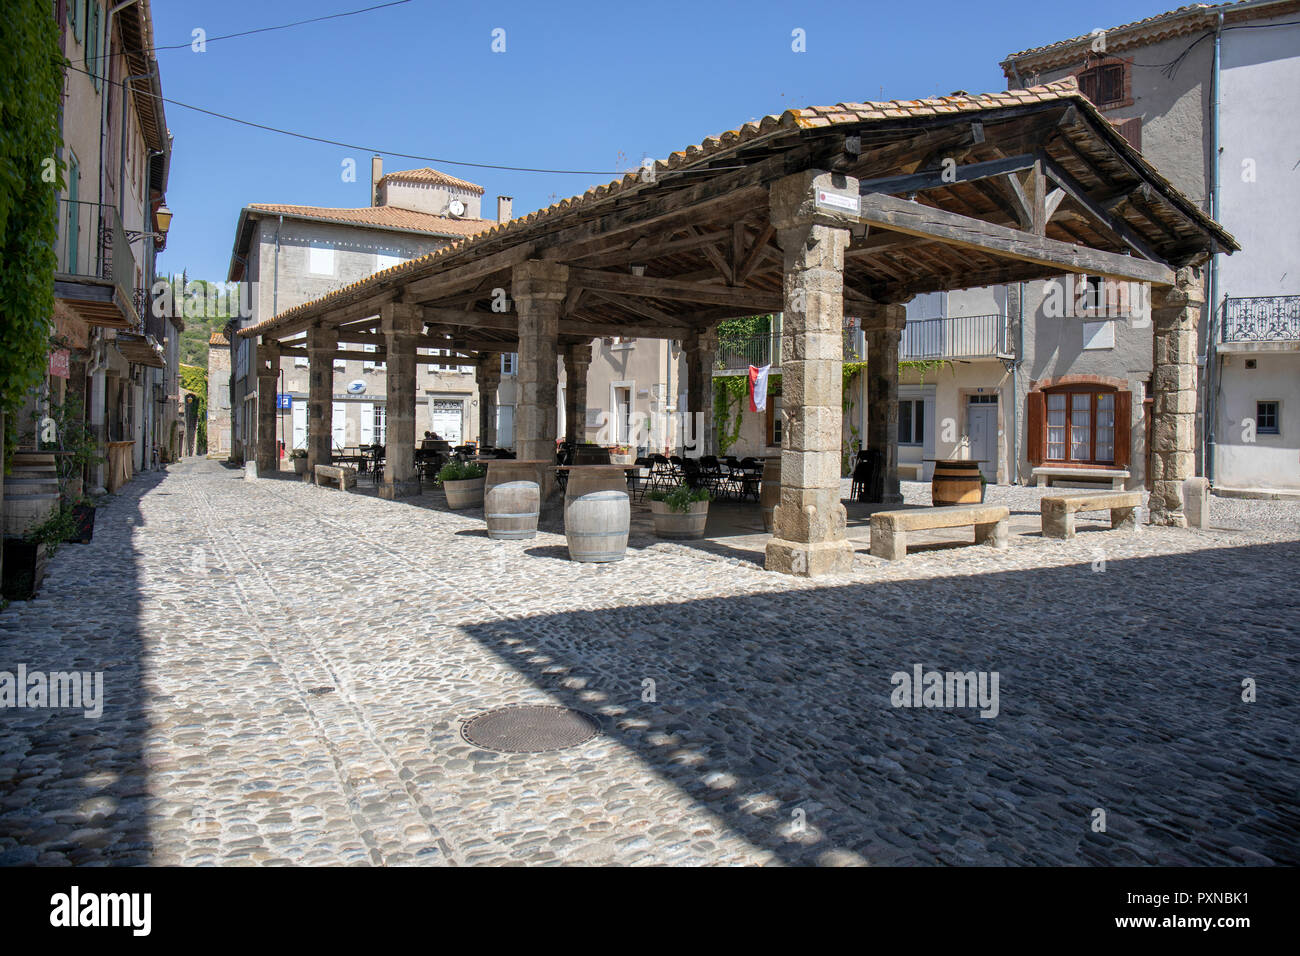 The medieval covered market at agrasse Stock Photo